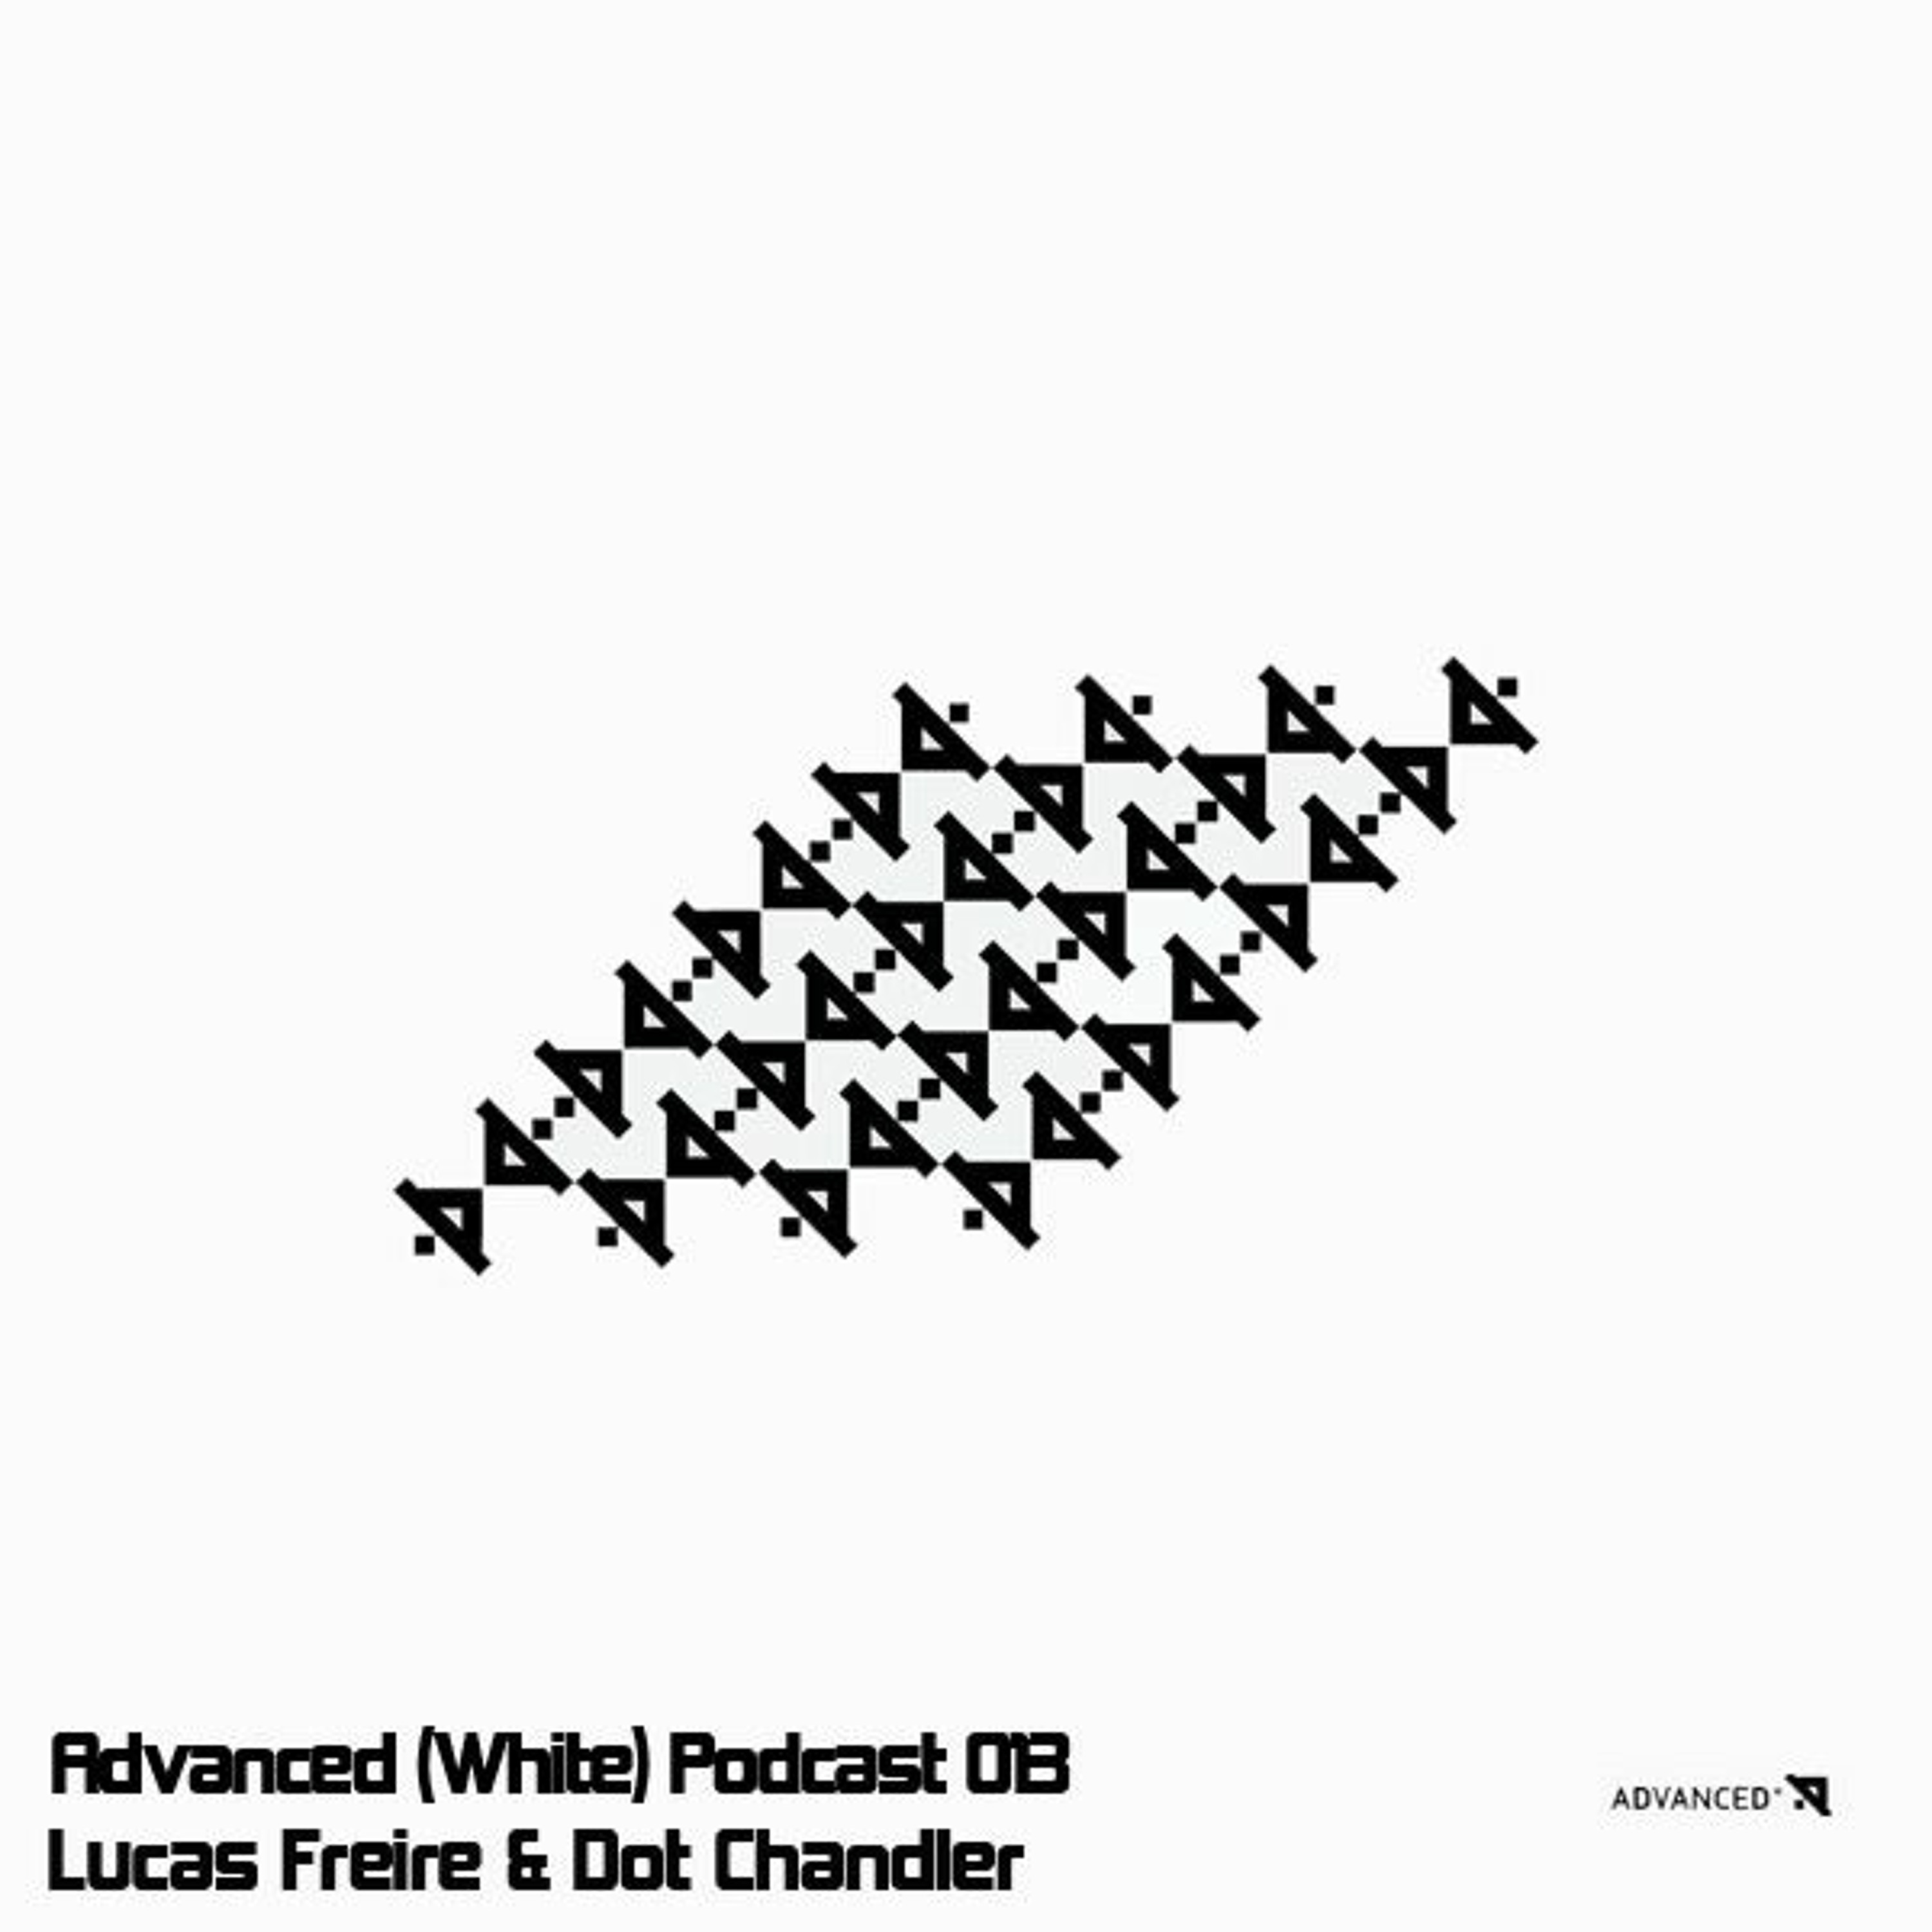 Advanced (White) Podcast 013 with Lucas Freire & Dot Chandler